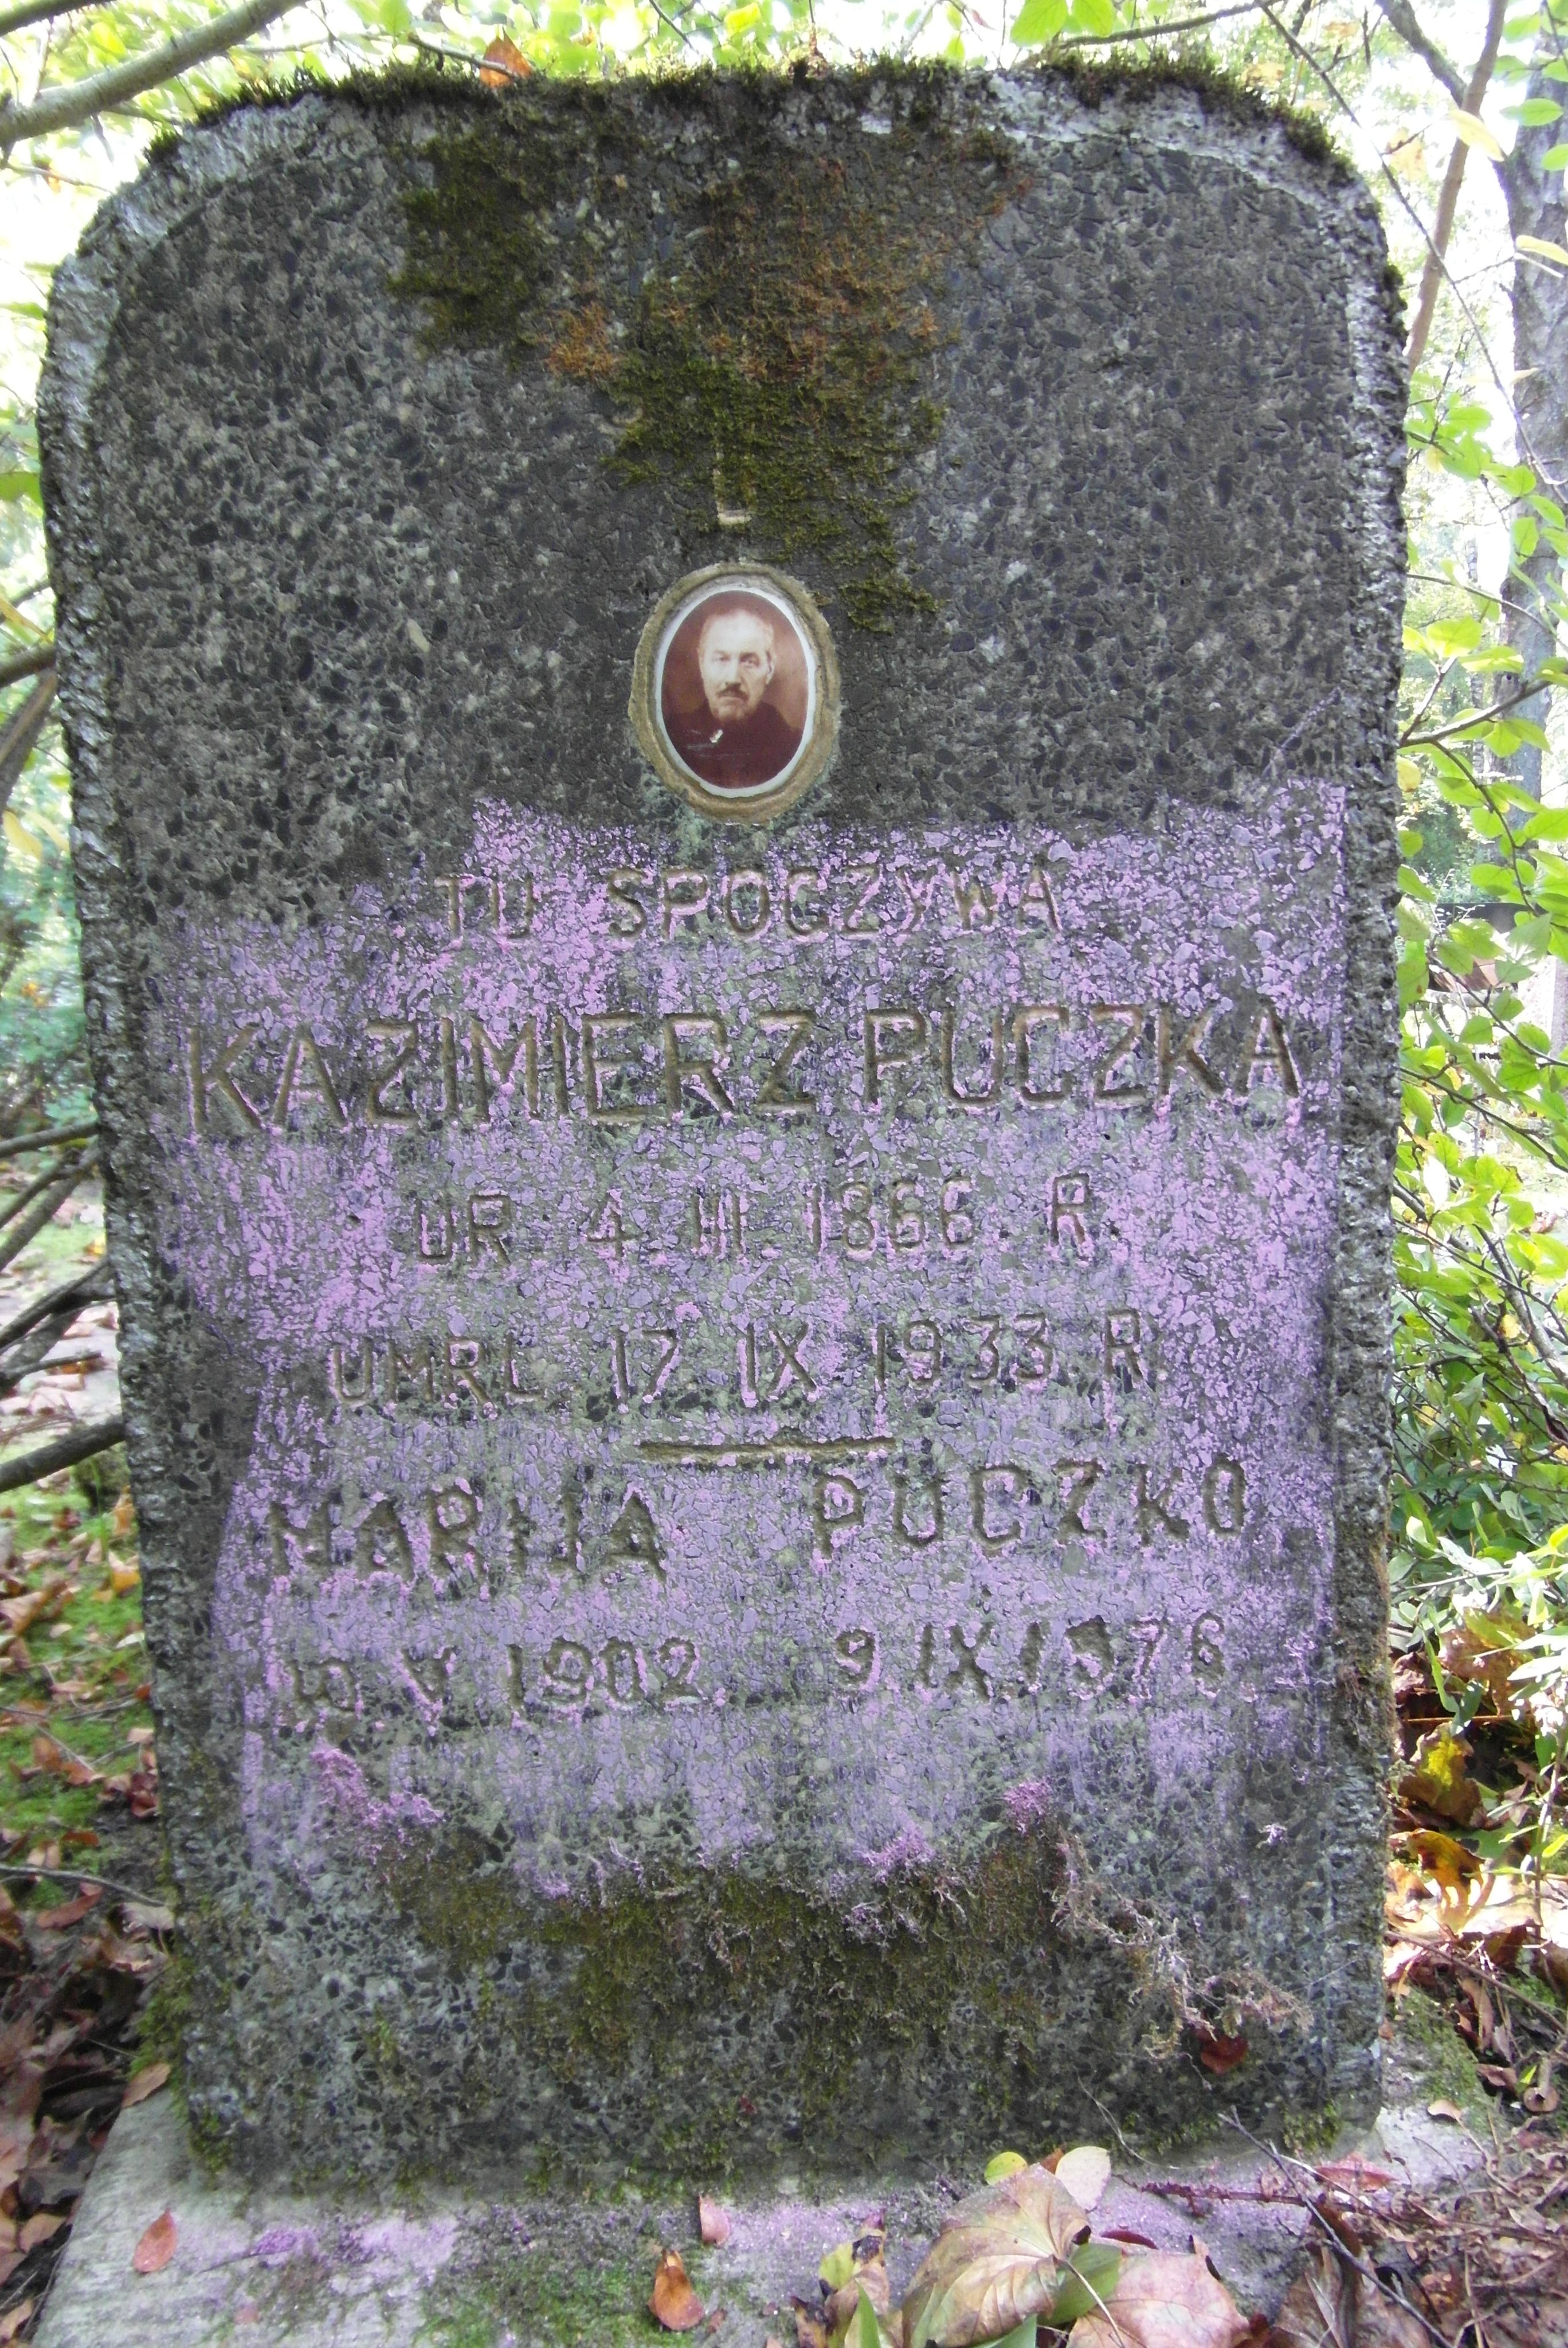 Tombstone of Kazimierz Puczko, Maria Puczko, St Michael's cemetery in Riga, as of 2021.